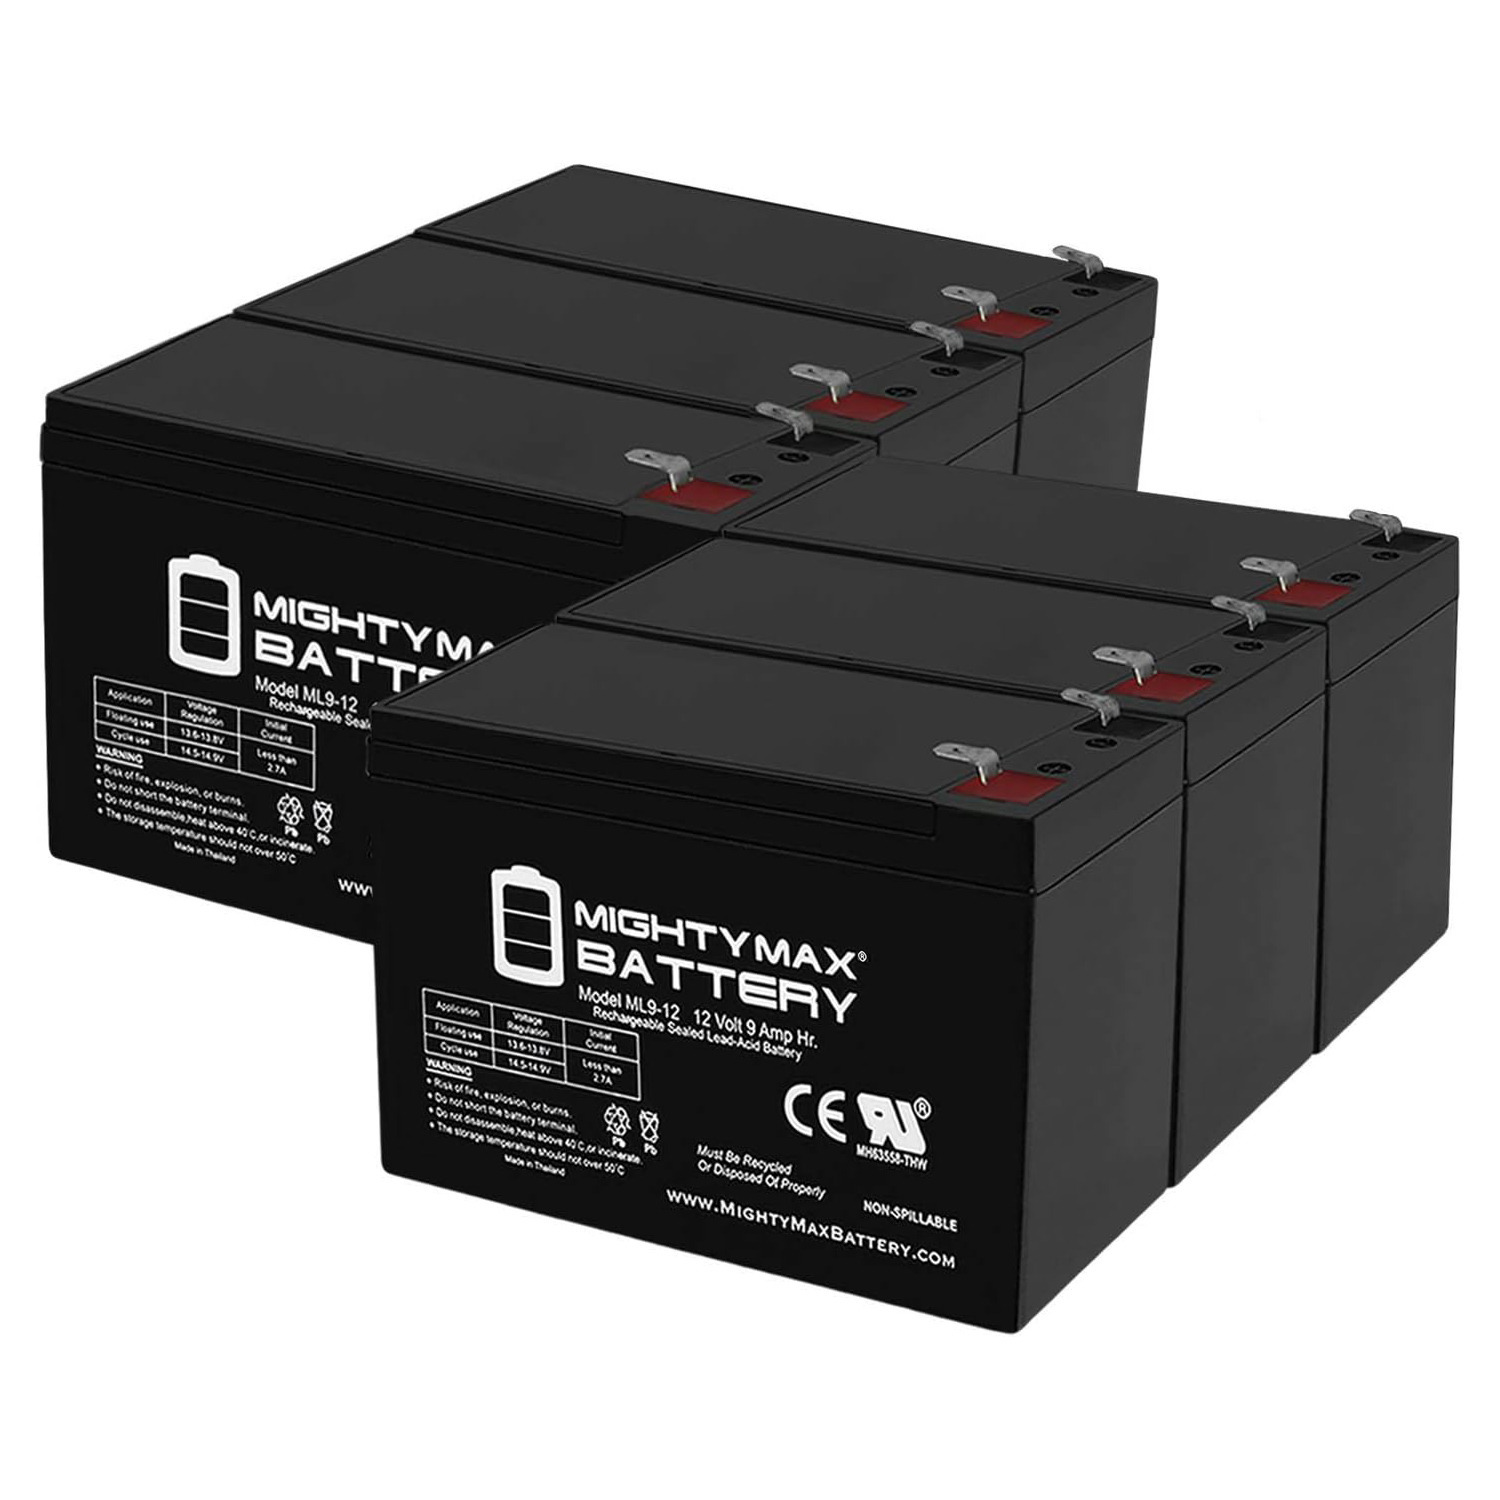 Altronix SMP7PMCTXPD4CB 12V, 9Ah Lead Acid Battery - 6 Pack